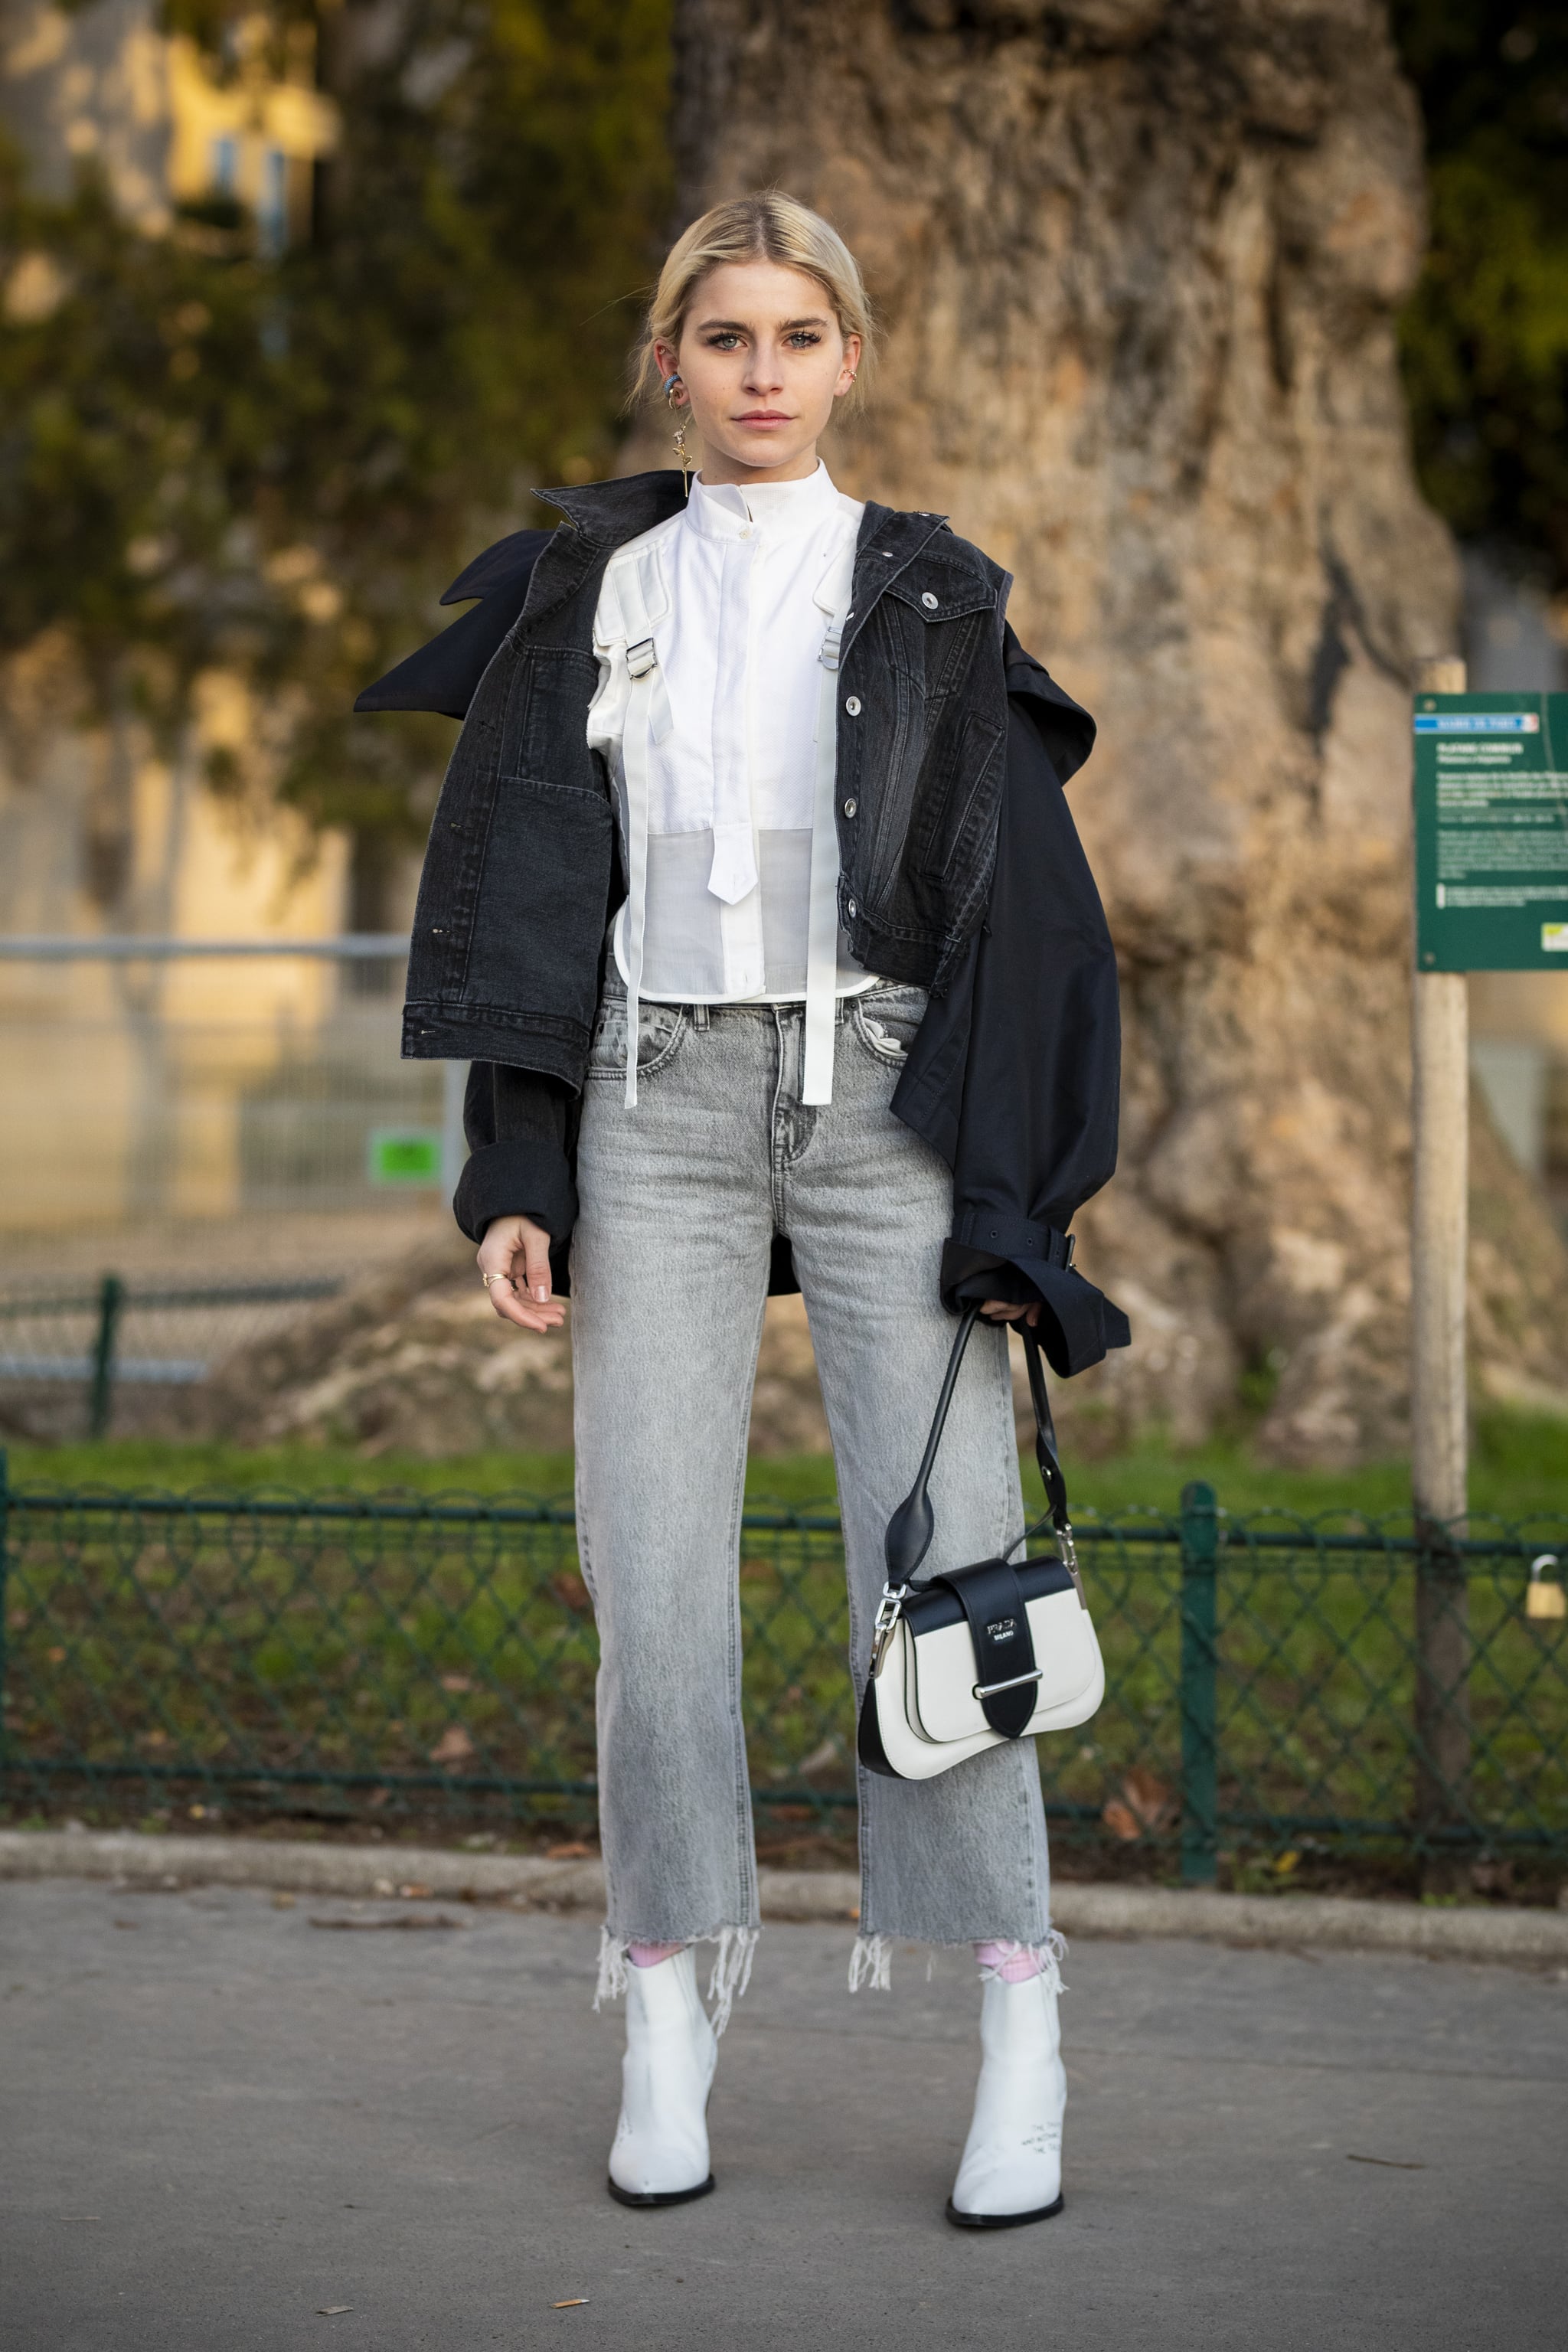 Jeans and Ankle Boots Outfit Idea: Go White